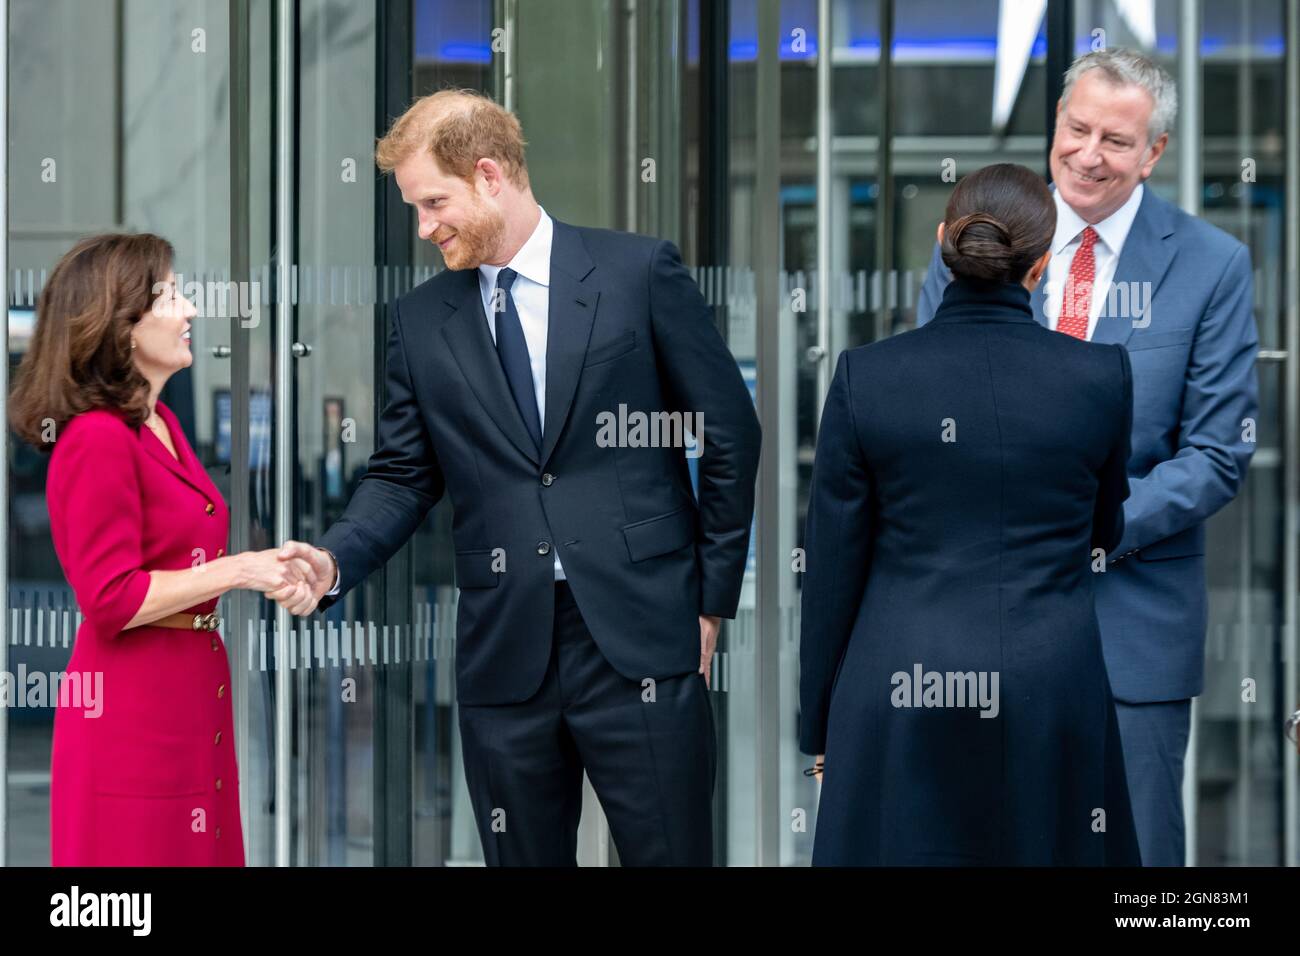 New York, USA. 23rd Sep, 2021. New York Mayor Bill de Blasio (R) and New York Governor Kathy Hochul (L) exchange parting words with Prince Harry and Meghan, The Duke and Duchess of Sussex, as they exit One World Trade Center after visitng the One World Observatory in New York City. Credit: Enrique Shore/Alamy Live News Stock Photo